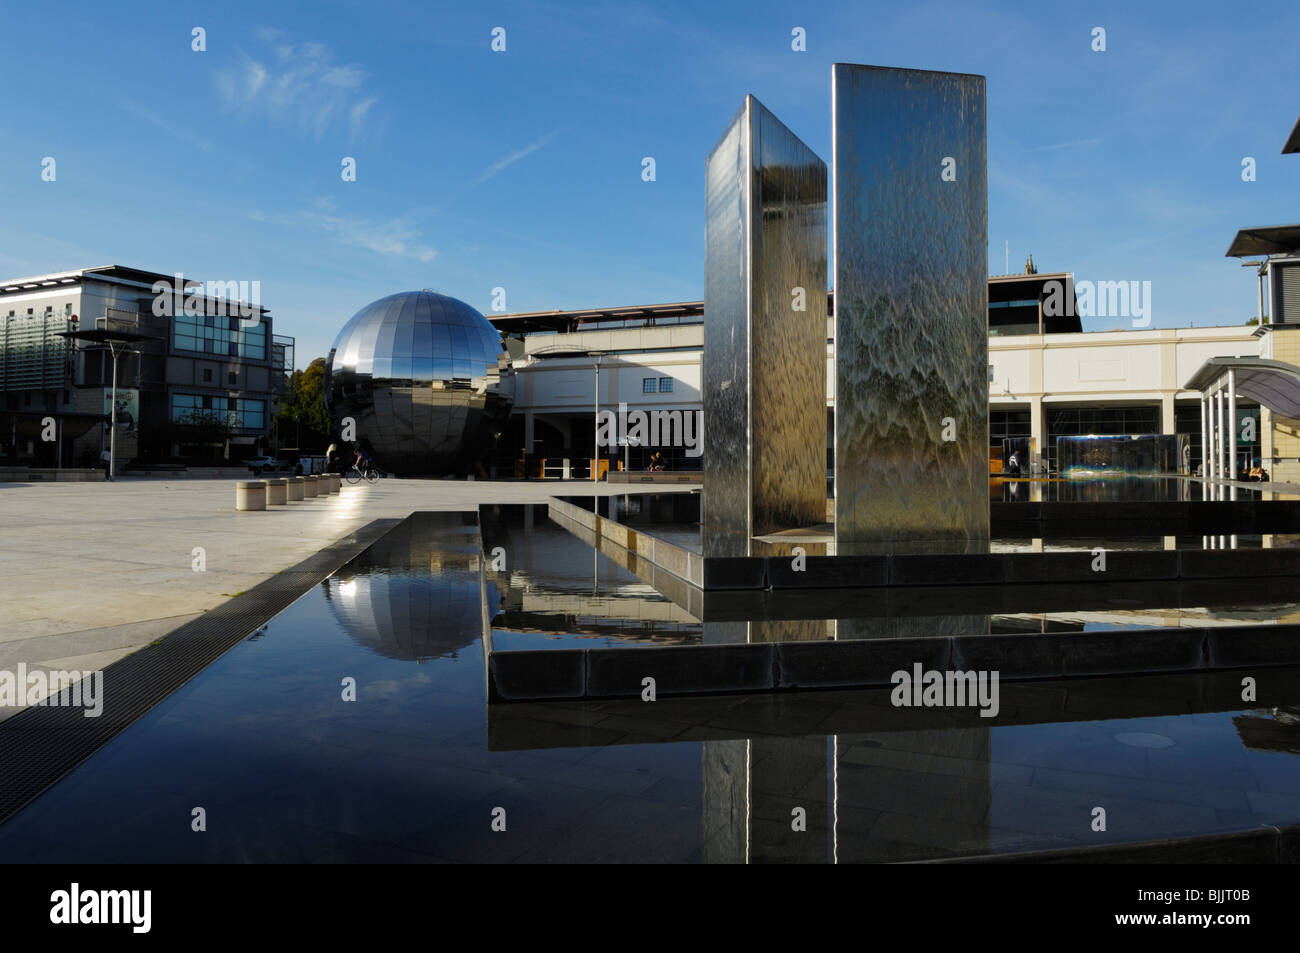 The Aquarena water sculpture in the Millennium Square at Harbourside in the city of Bristol, England. Stock Photo